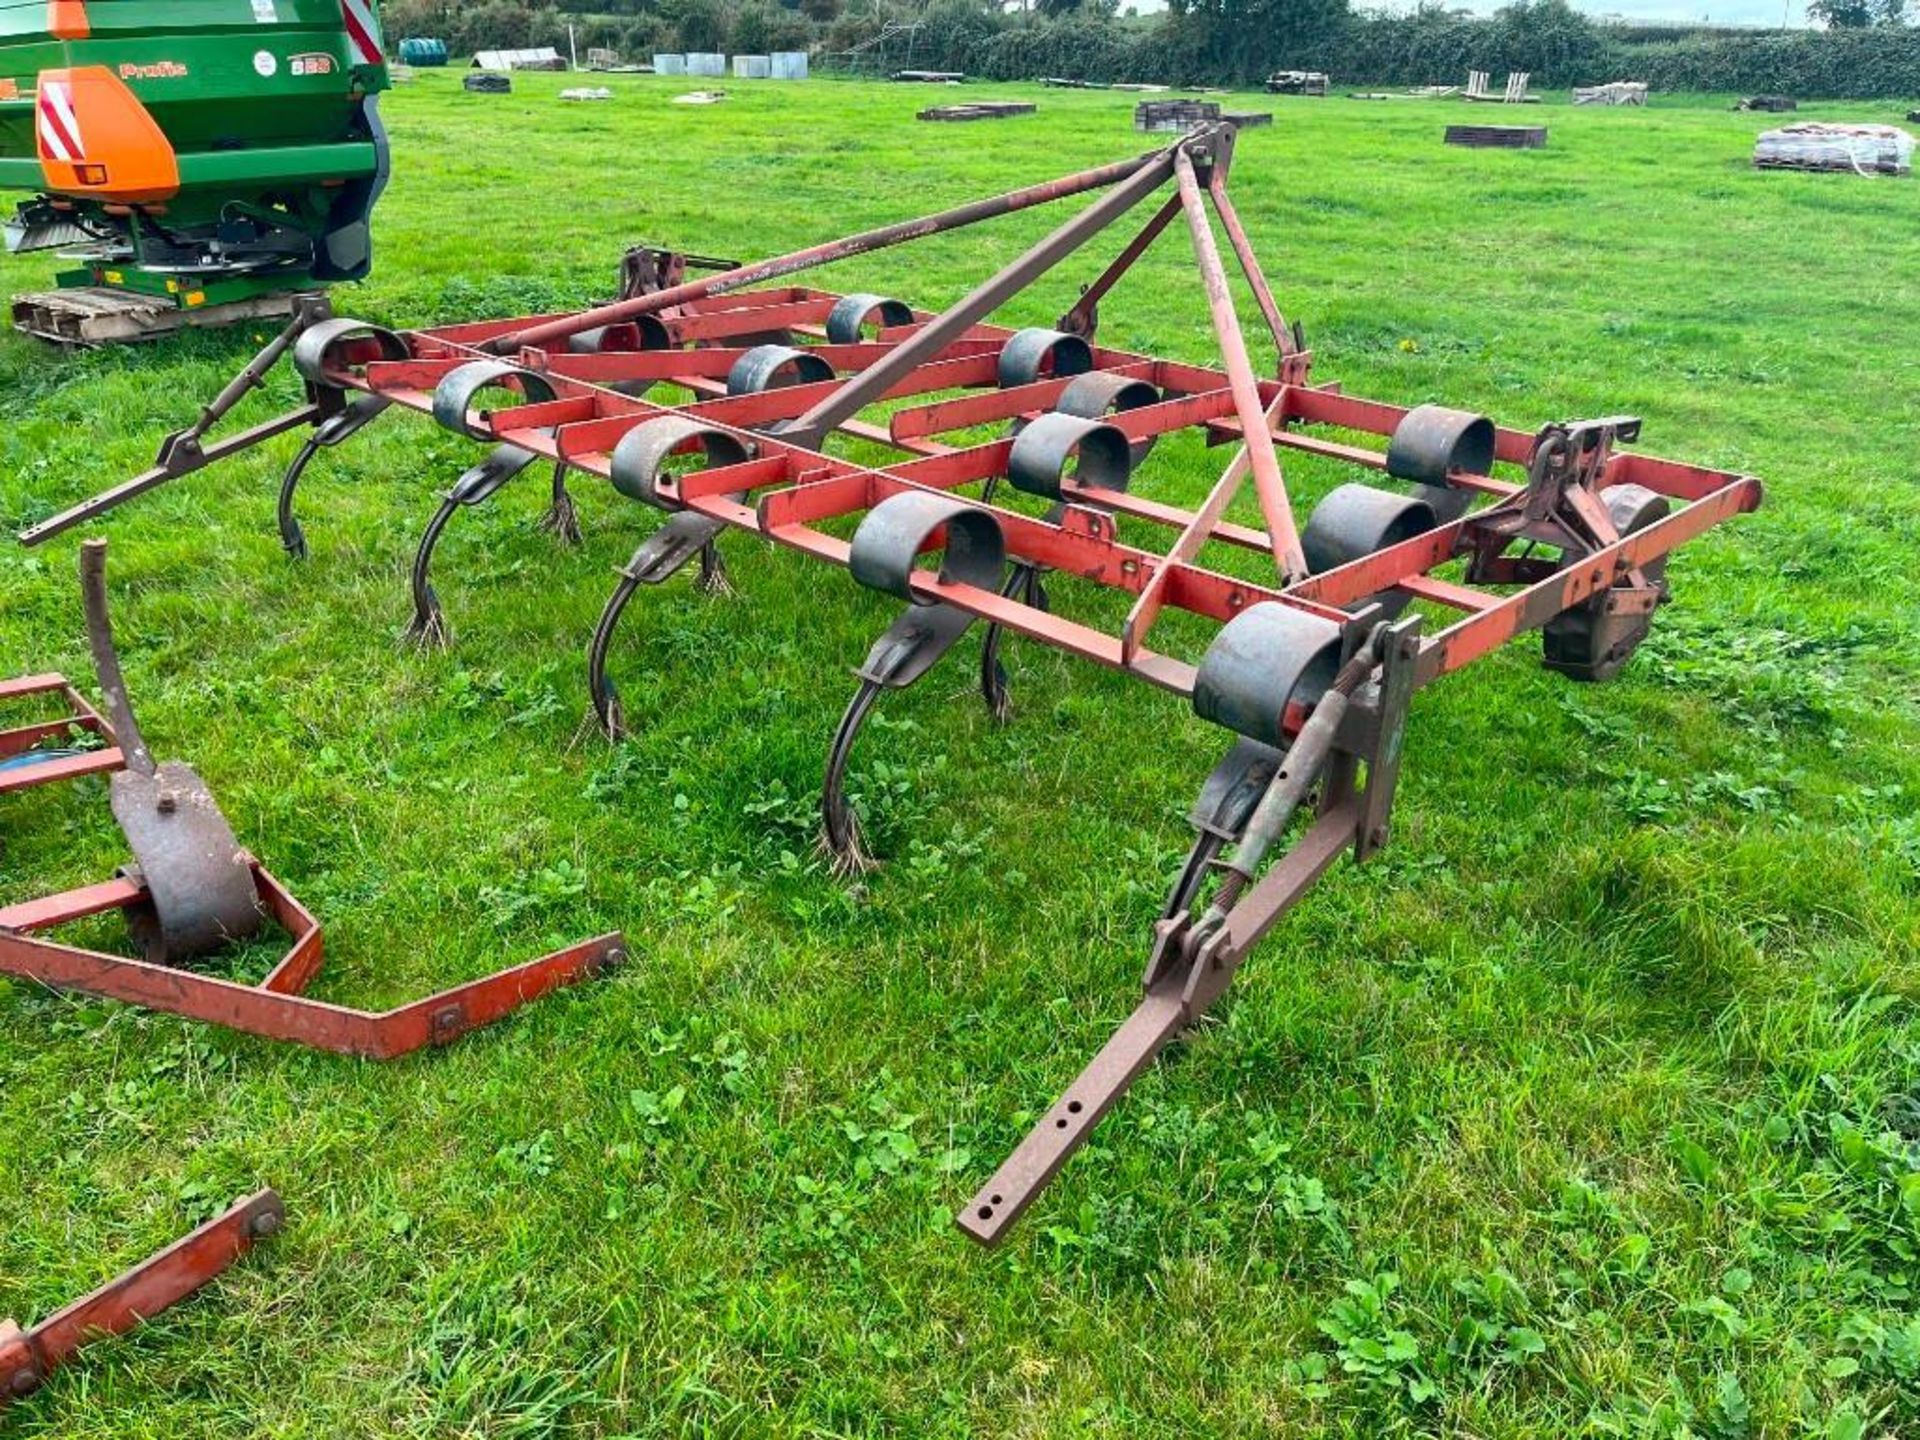 Kongskilde Vibroflex 3m, Stubble Cultivator, Wing Extentions to 4m - Image 3 of 5